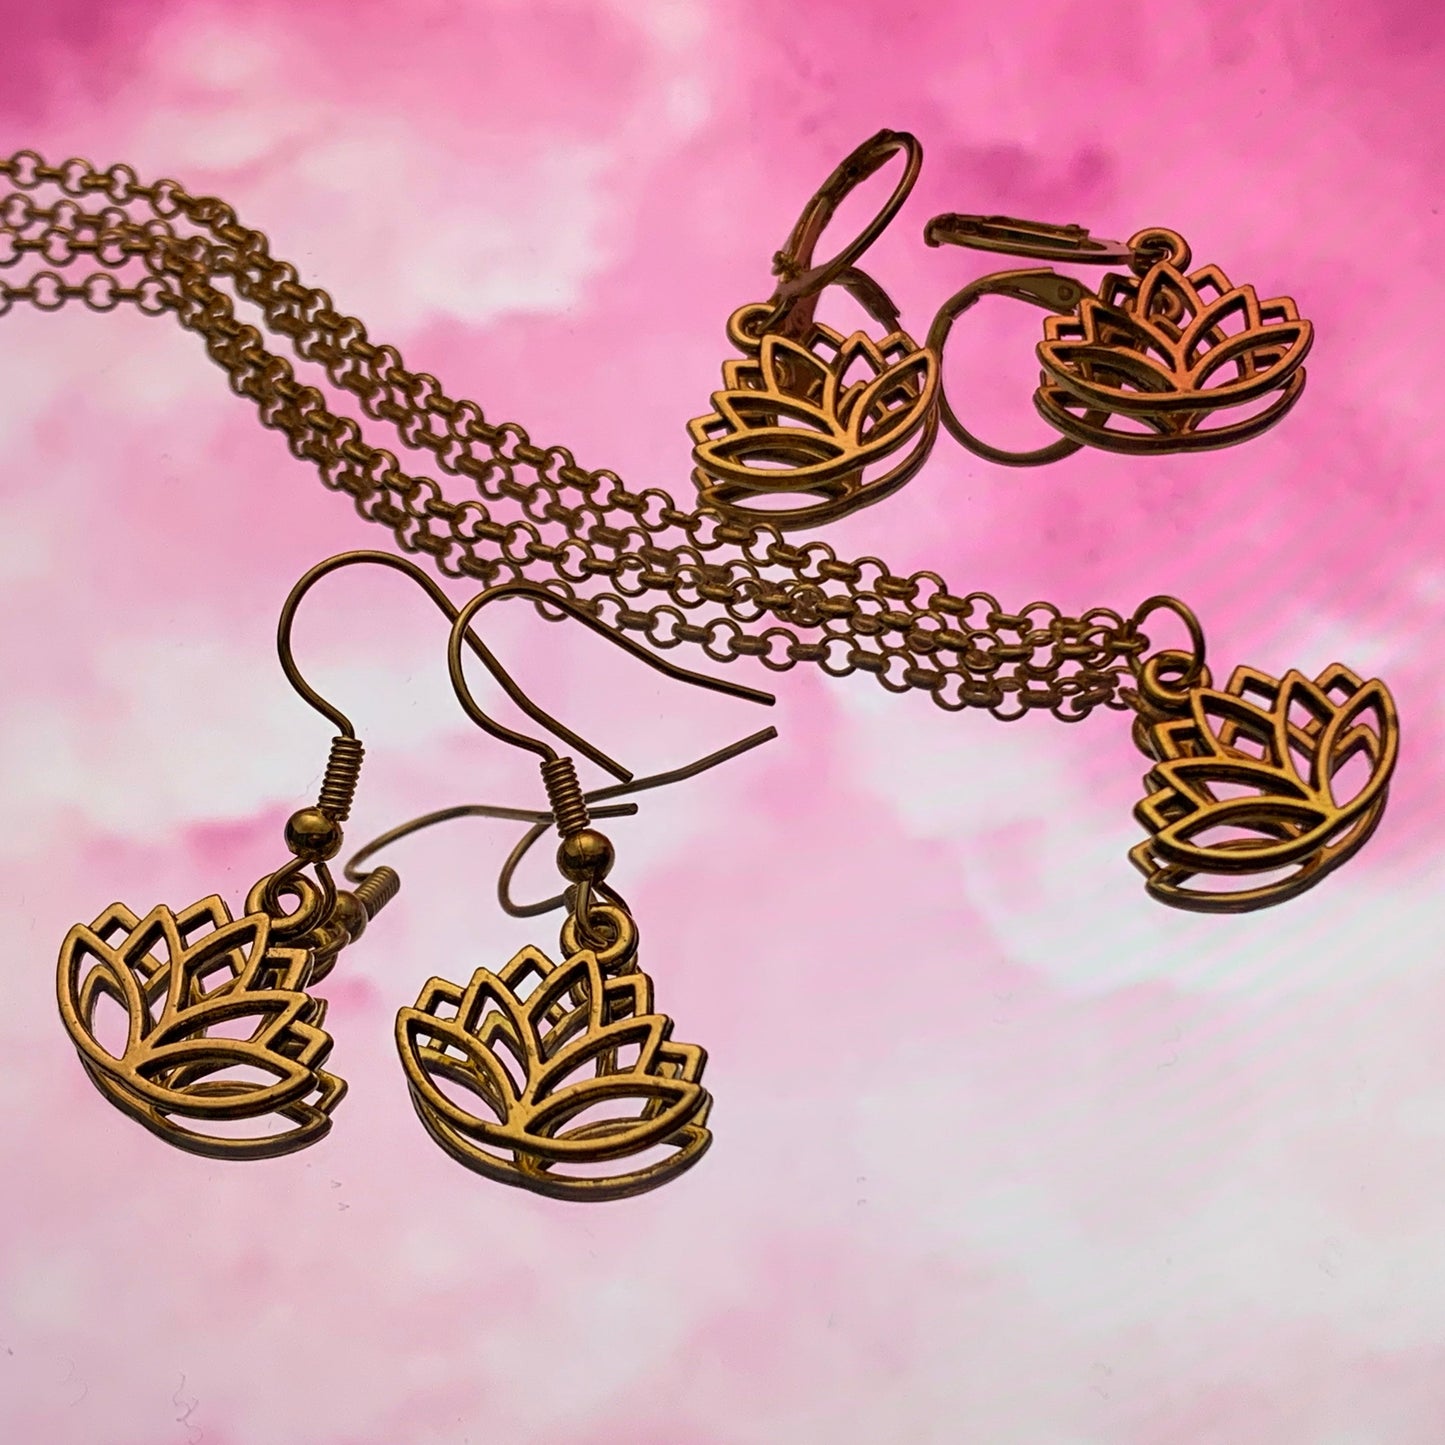 Gold or Silver Lotus Flower Charm Necklace and Earring Set - Lxyclr Authentic